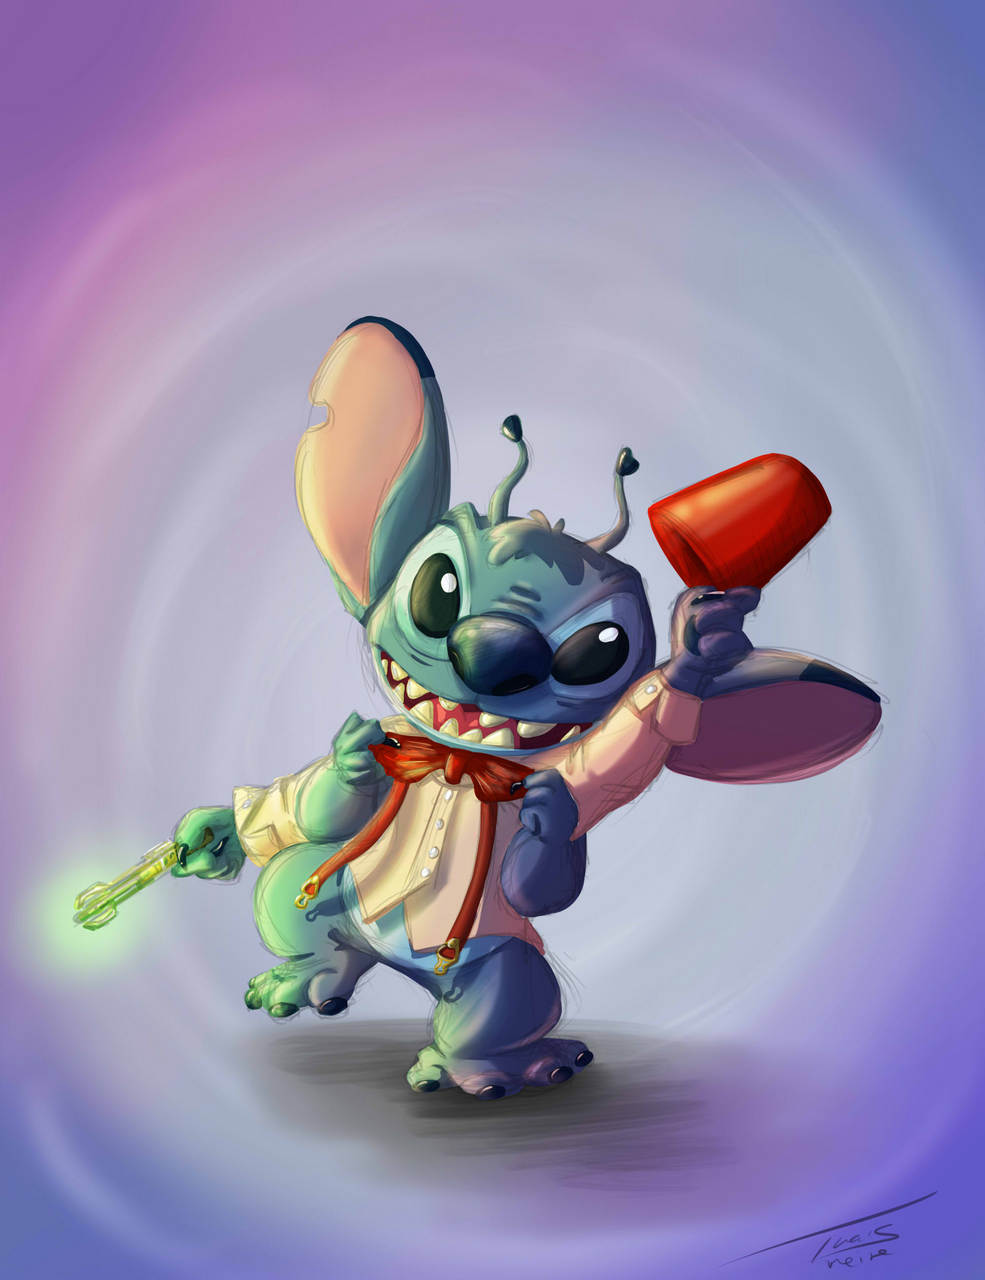 Eleventh Doctor Stitch Lilo And Stitch The Doctor By Pimander144